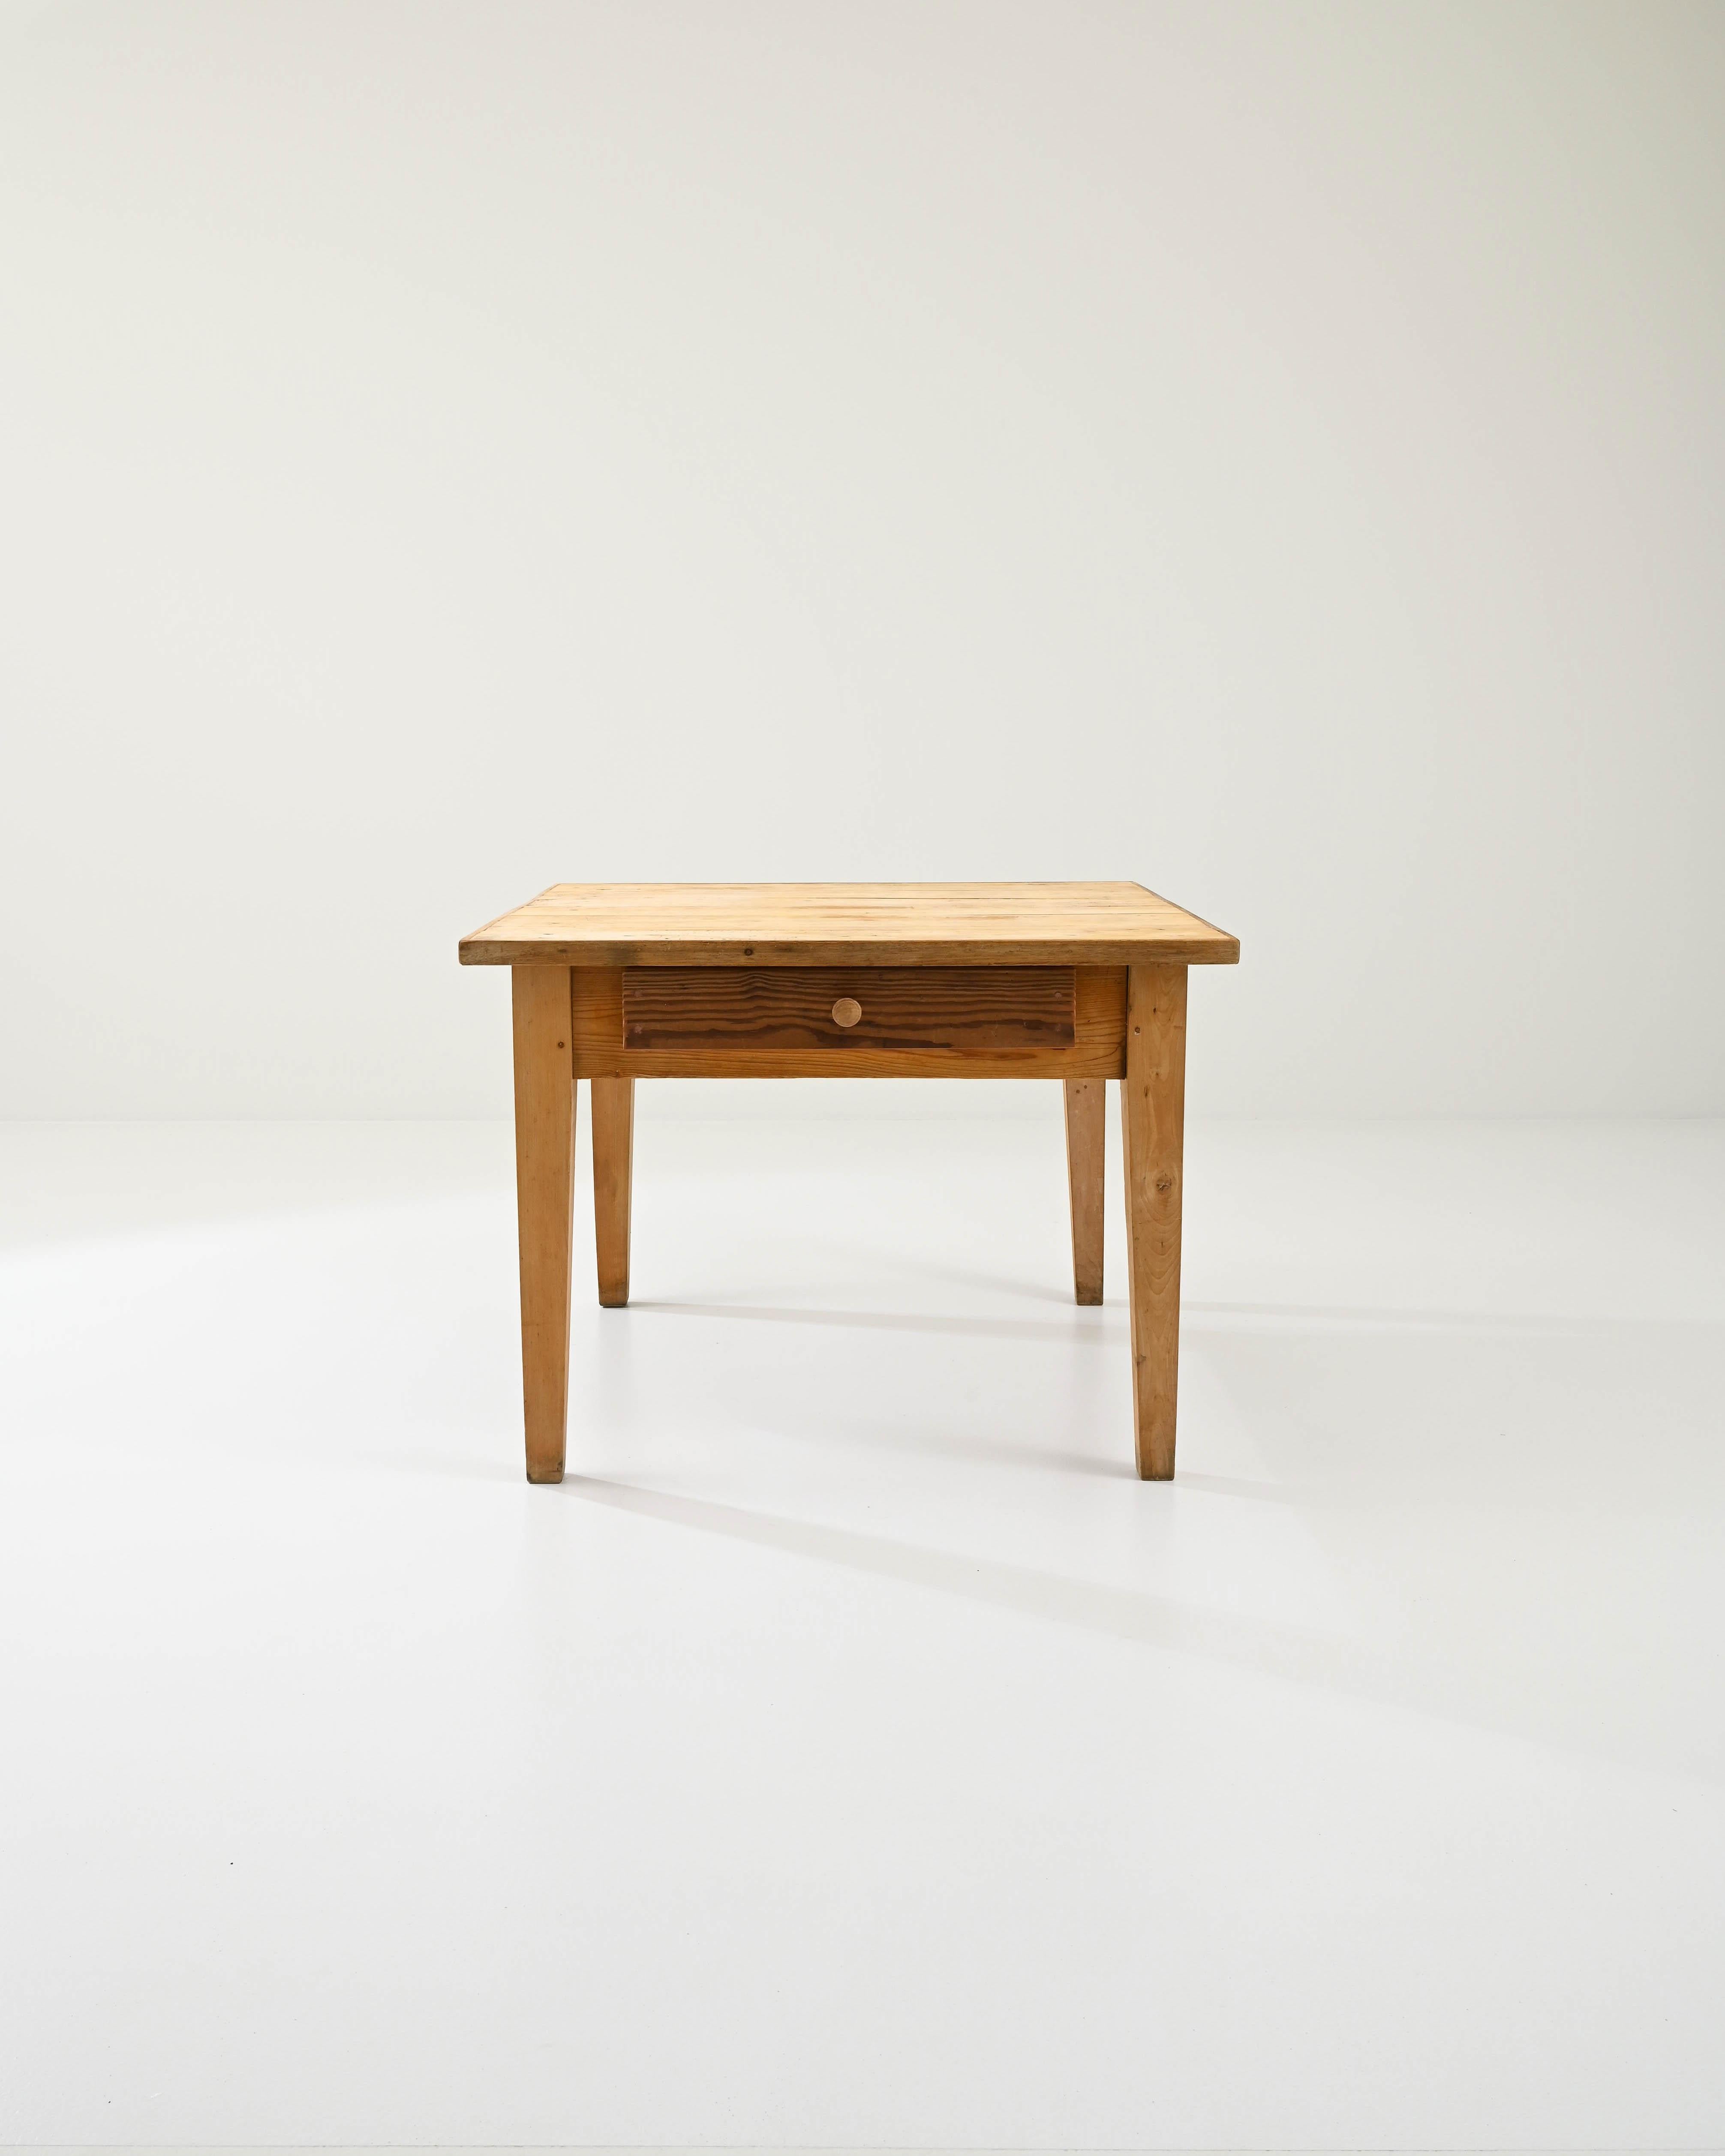 A wooden table created in 1900s France. Minimal and sturdily constructed, this table exudes a sense of forthright purpose and a cheery disposition. Mortise and tenon joinery, gently tapered legs, and a dowel peg construction, this table appears